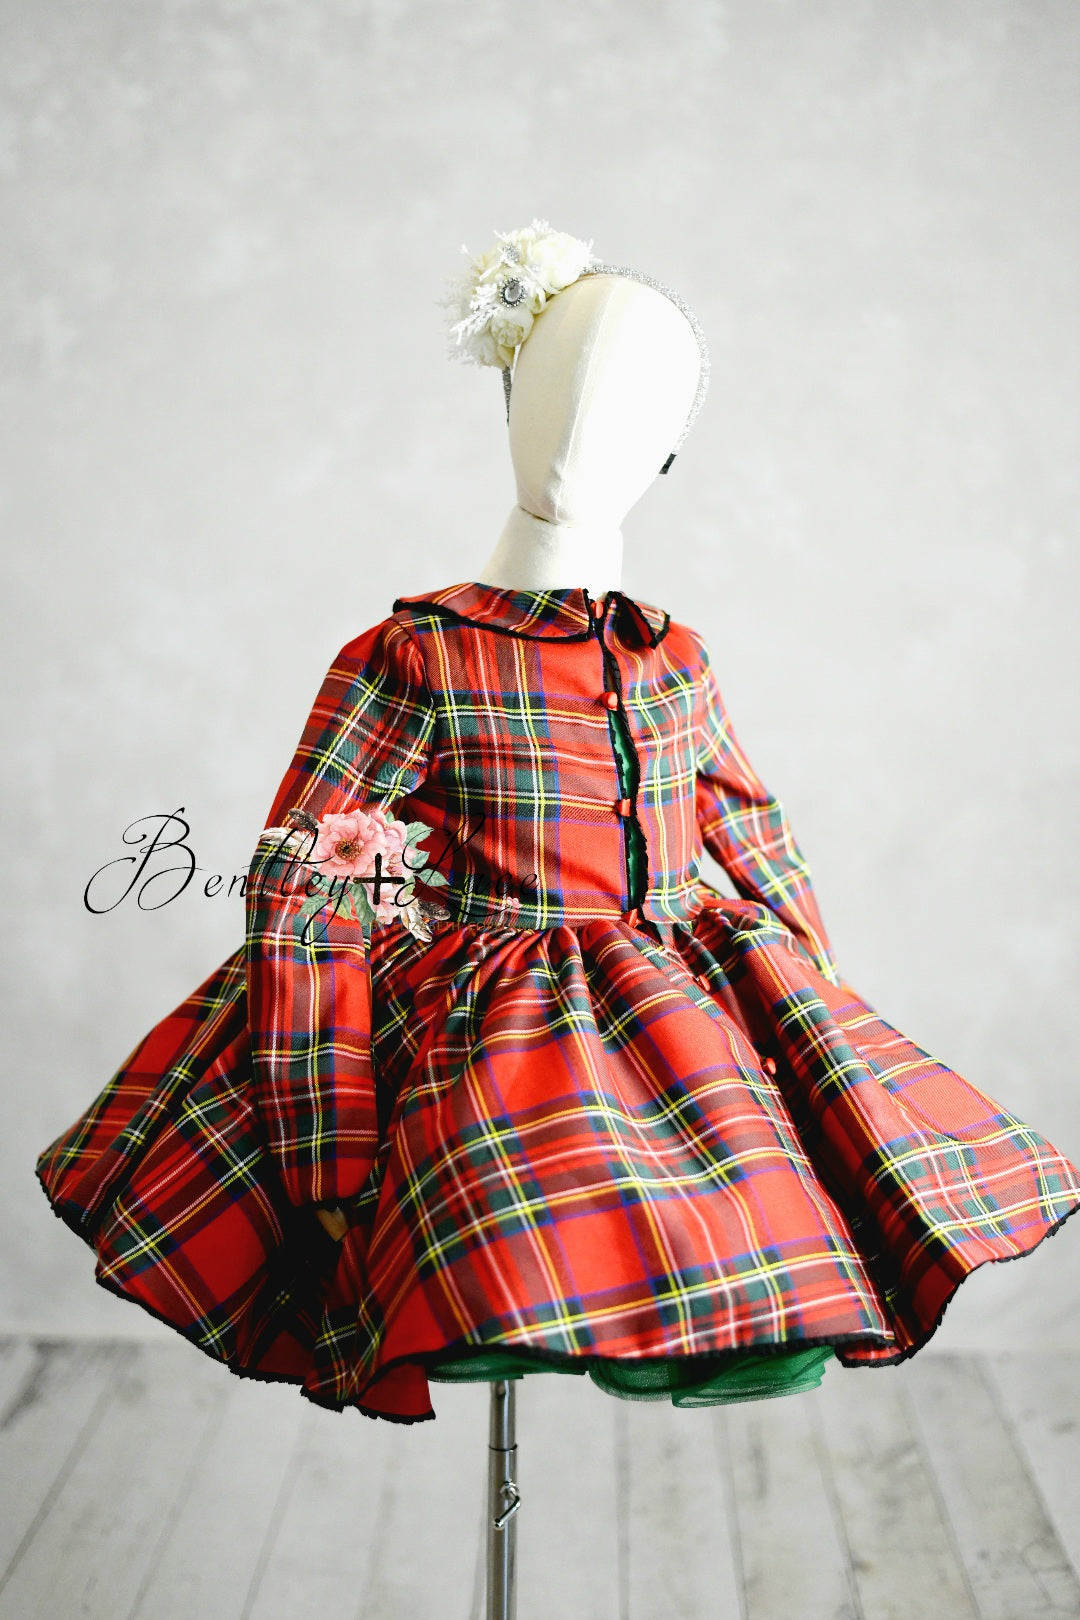 "Darling Plaid" Solid Dress + Jacket -Red or Black plaid fabric option.- Pick color option. Editorial Dress, Couture Gown, Special Occasion Dress